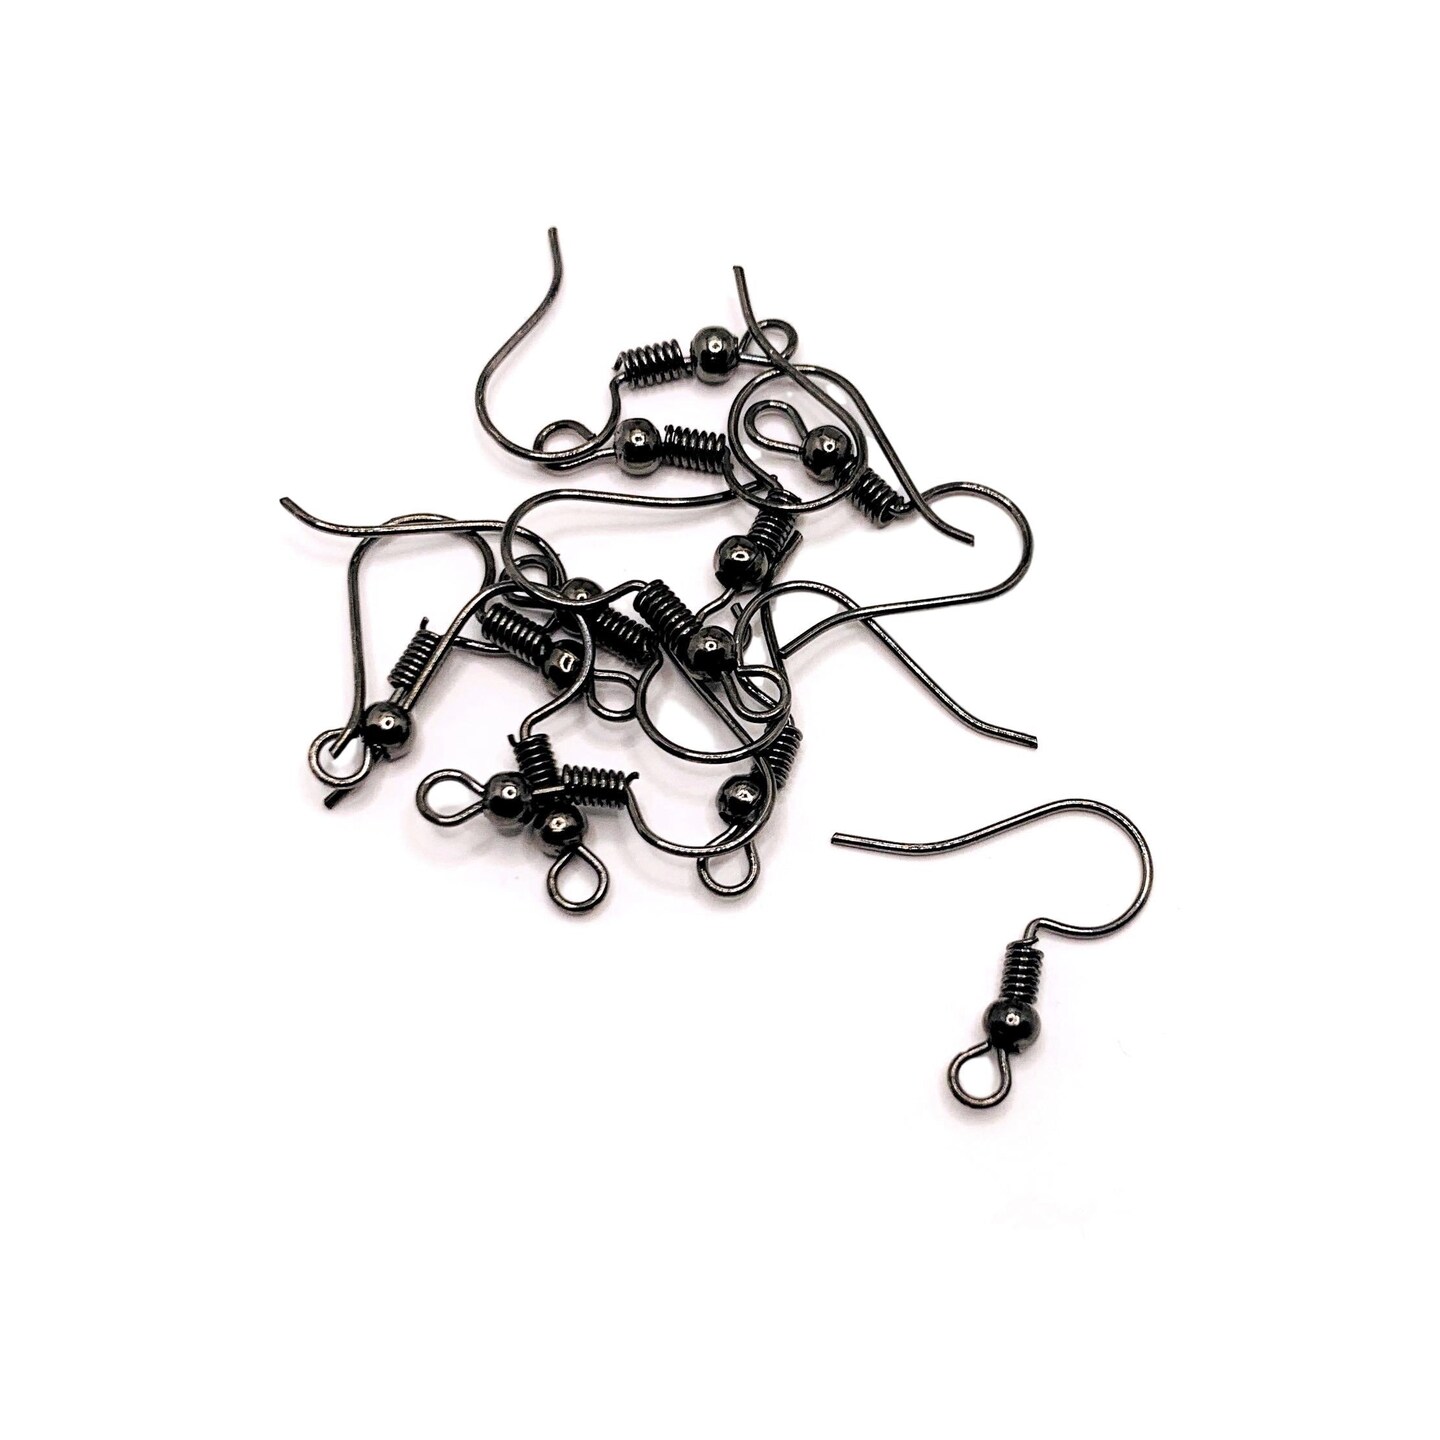 100 or 500 Pieces: Gunmetal Gray Fish Hook Earring Wires with